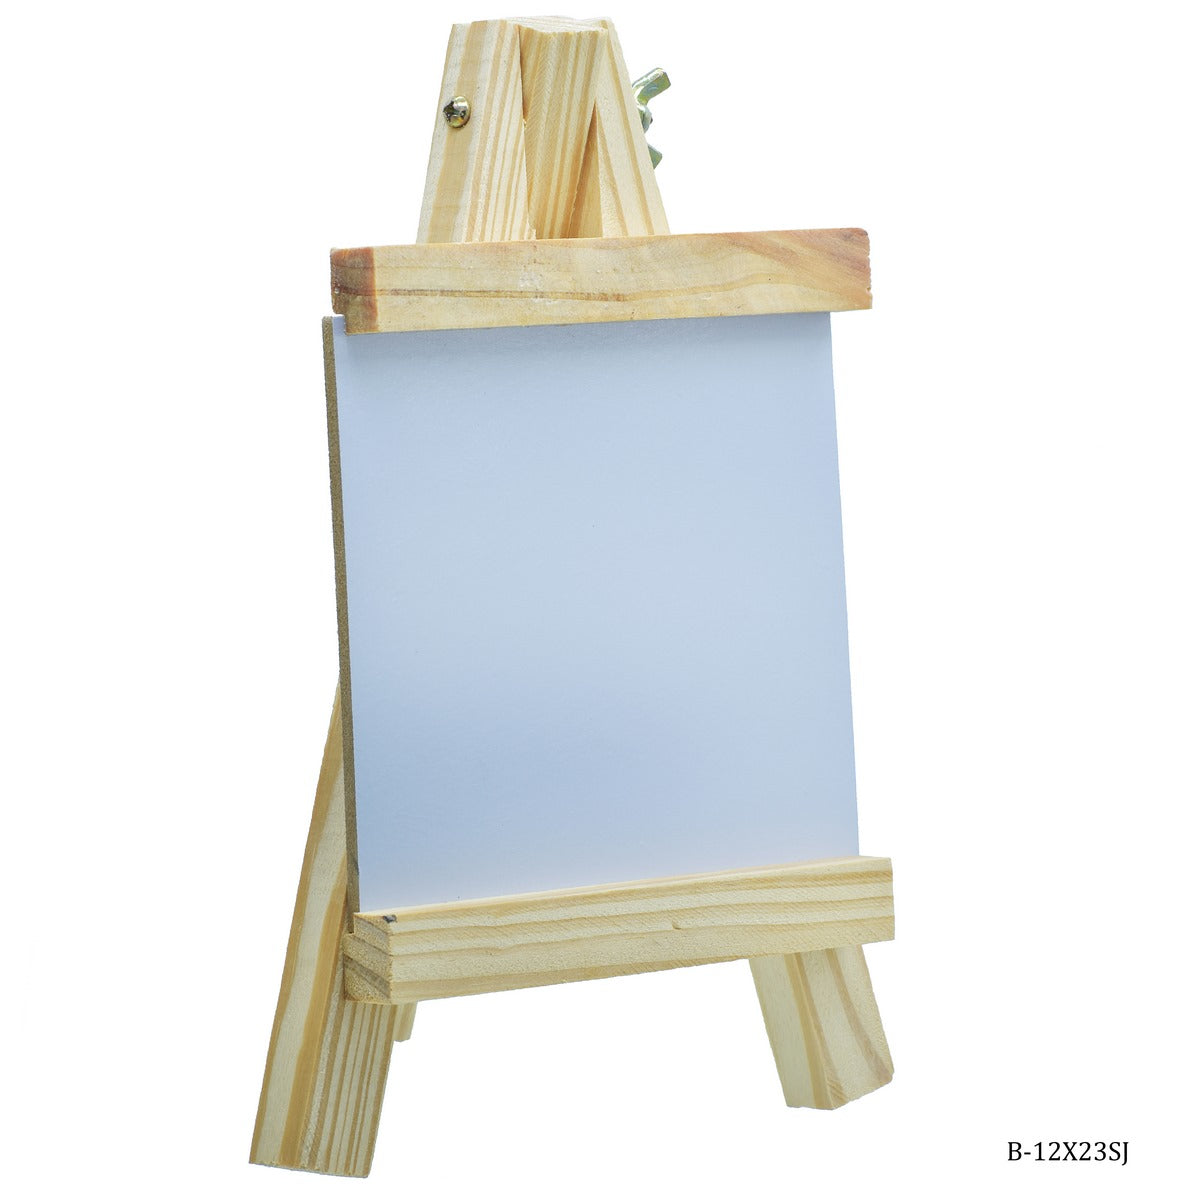 jags-mumbai Easel & Canvas Drawing Board With Easel Stand White 12x23 B-12X23SJ